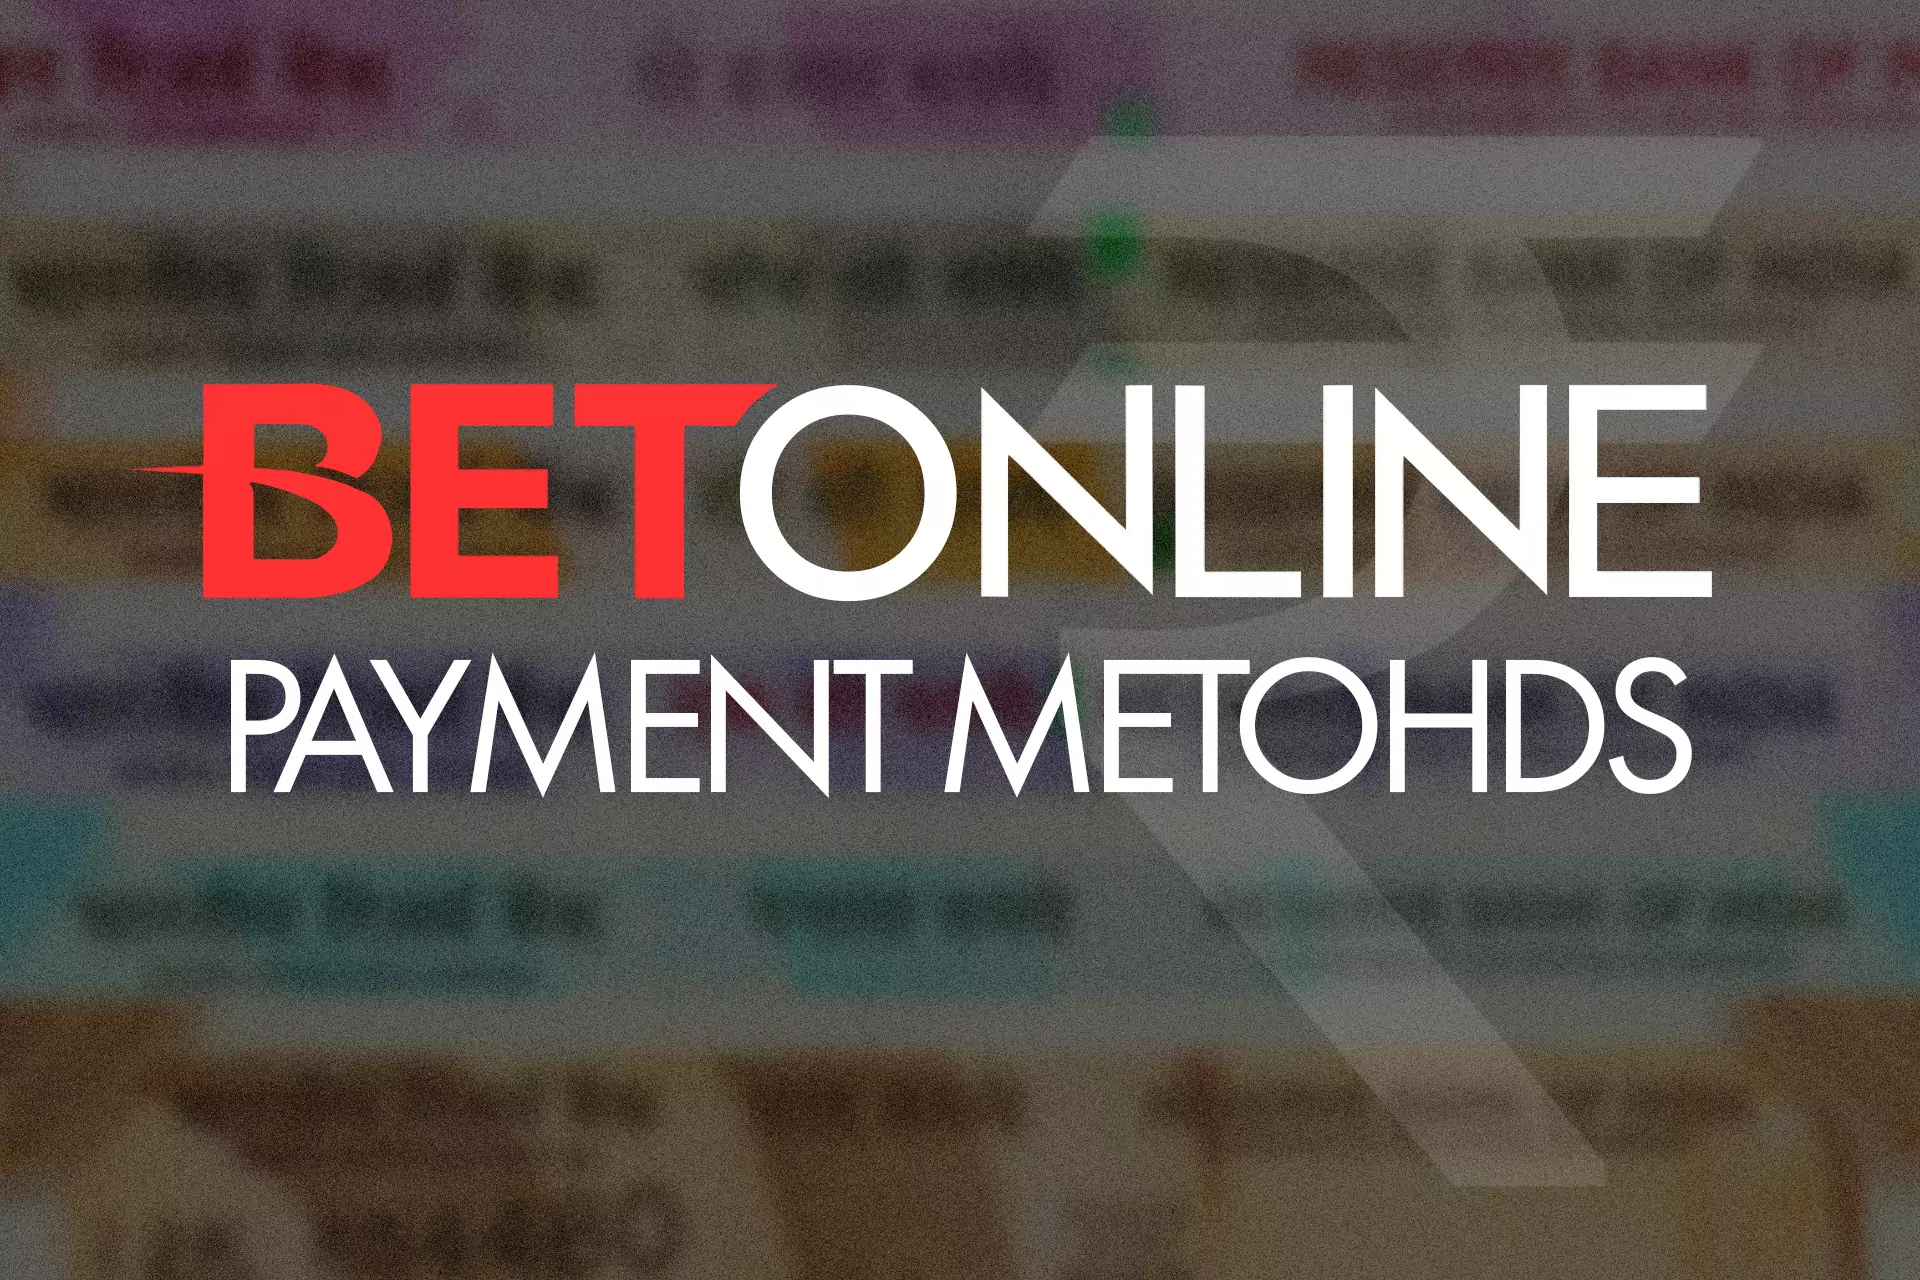 Use your payment system to make deposits and withdraw winnings from BetOnline.